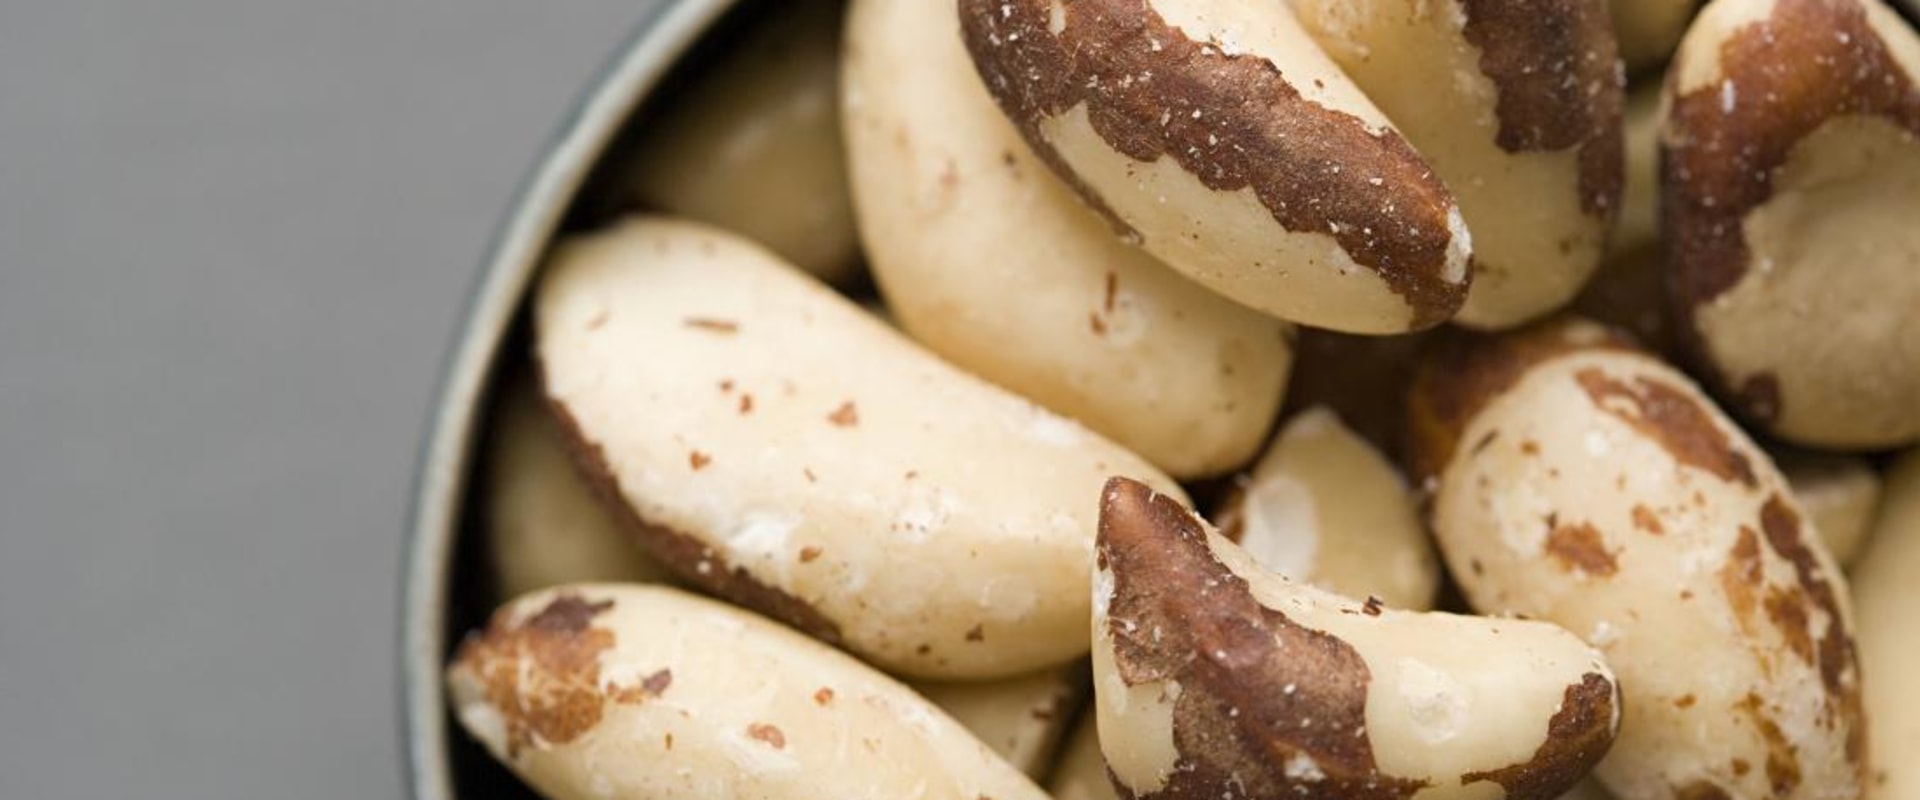 What is the season for brazil nuts?